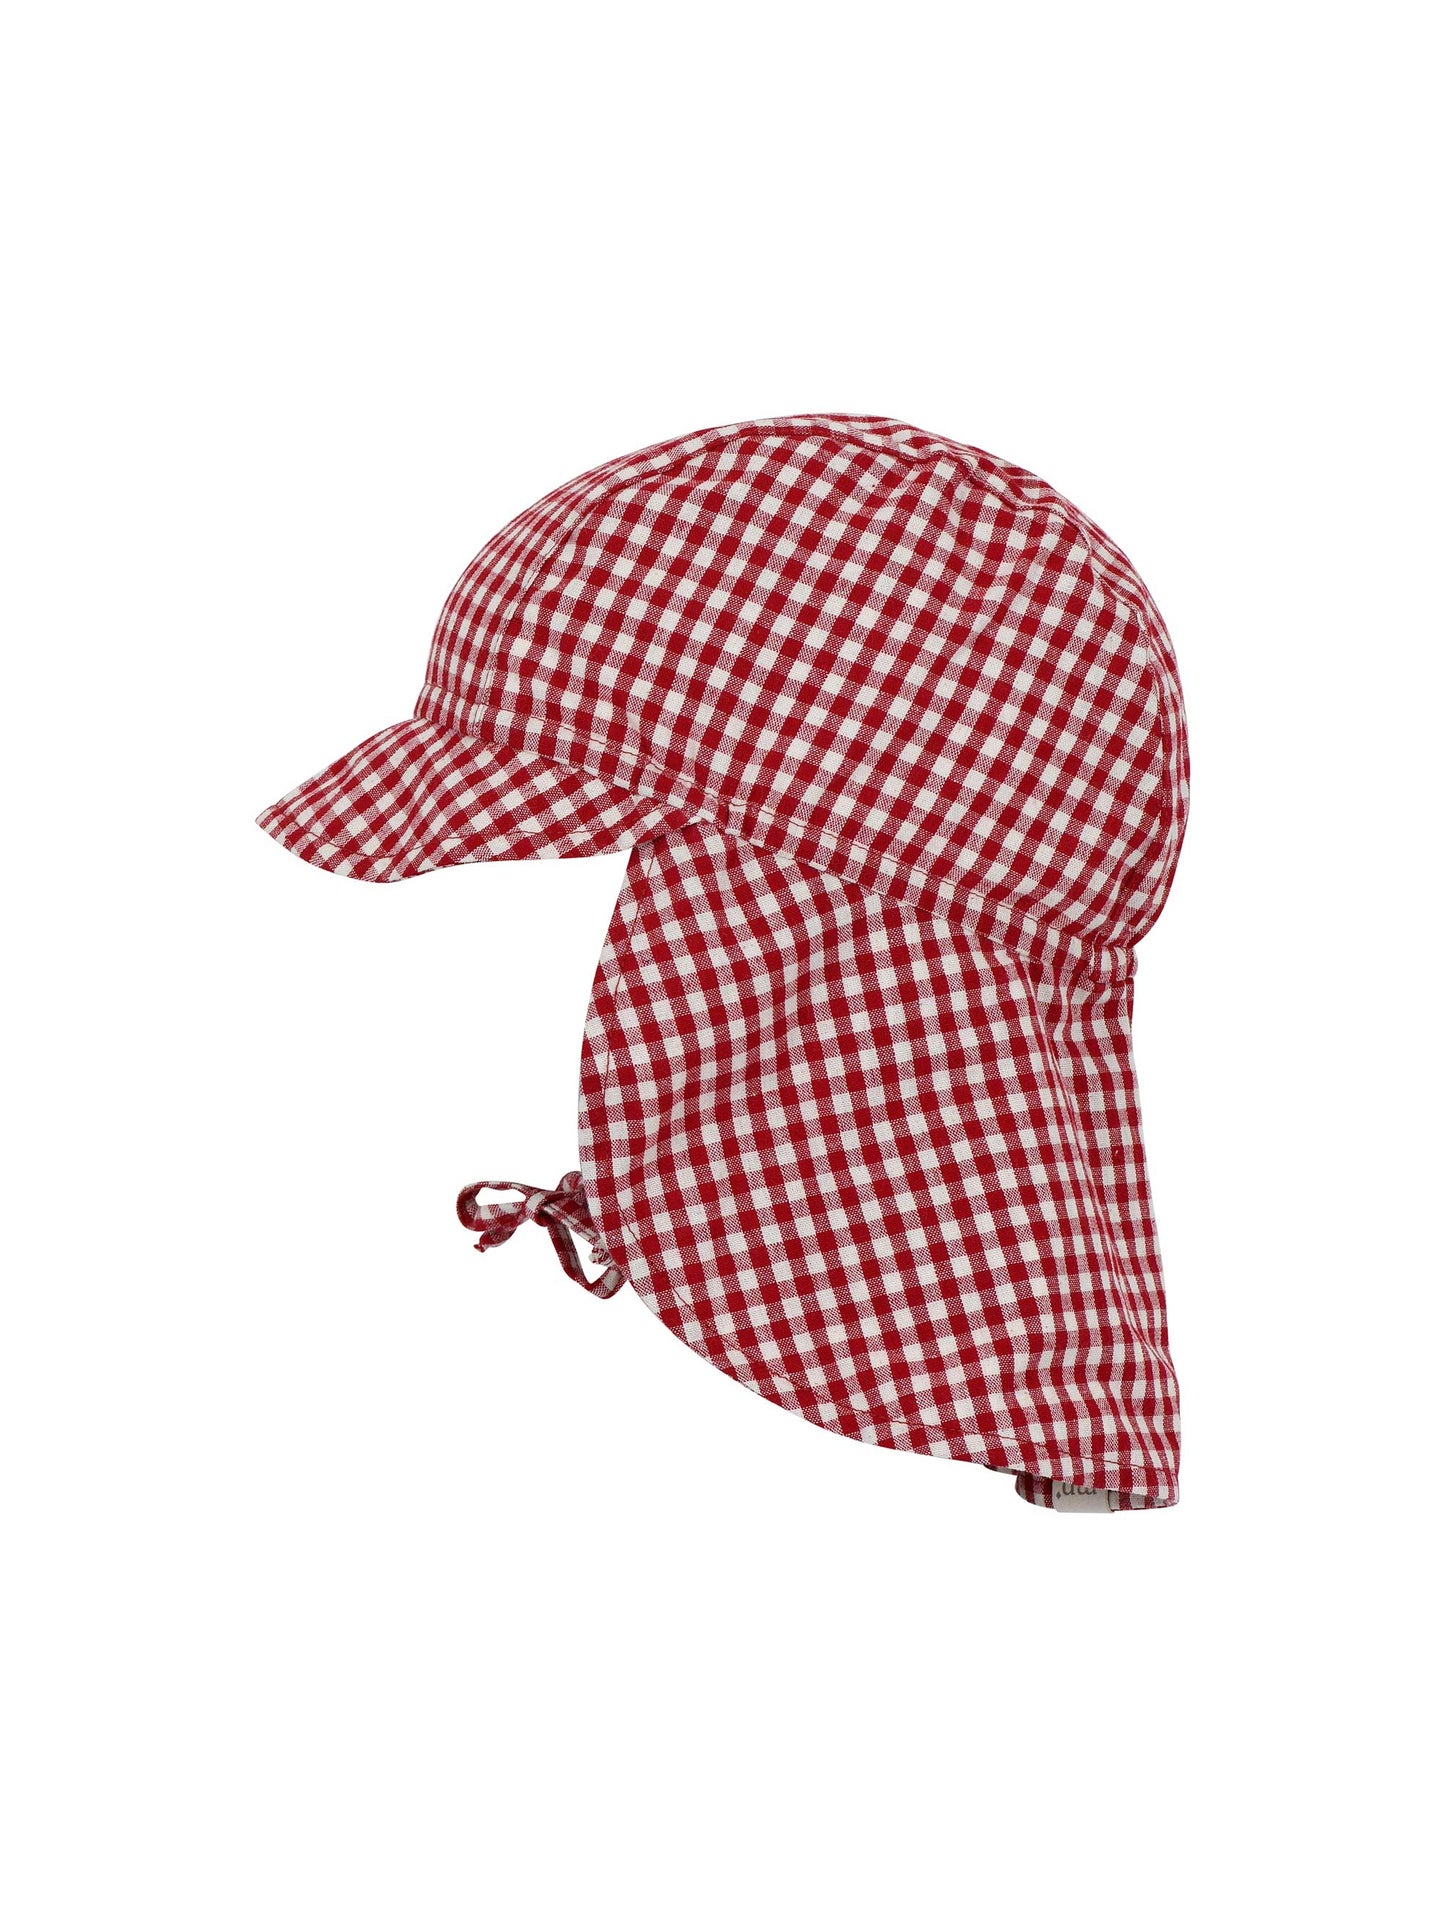 Red Check Hat with Neck Shade